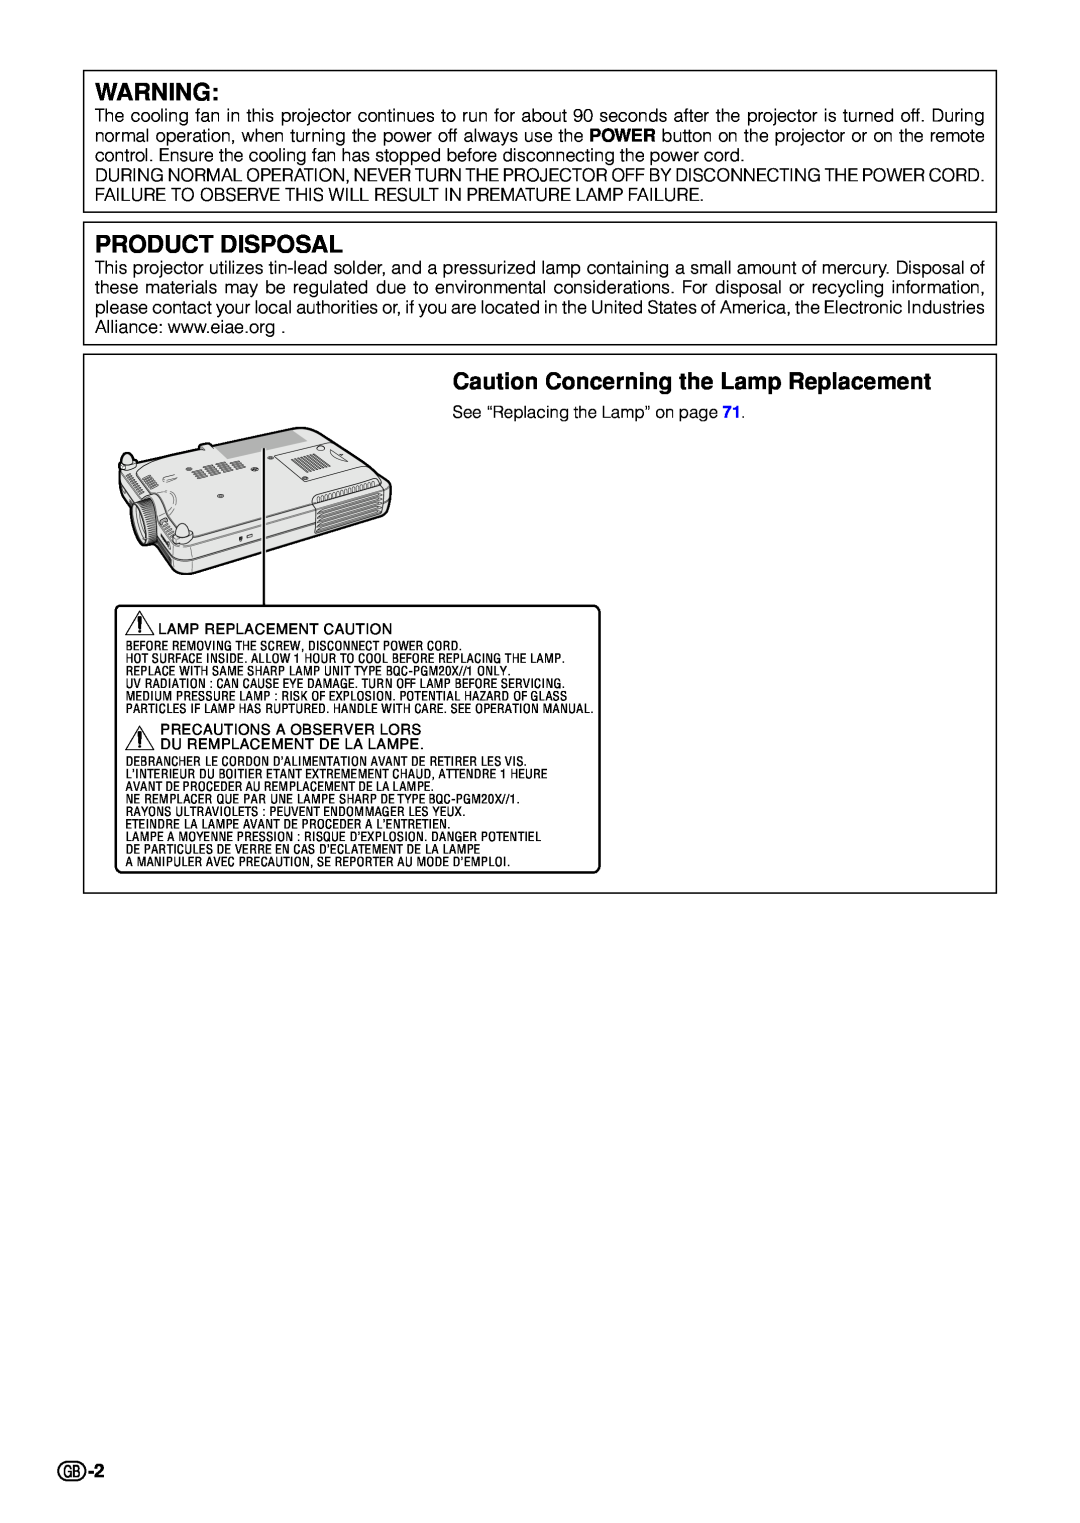 Sharp PG-M20S operation manual Product Disposal, Caution Concerning the Lamp Replacement 